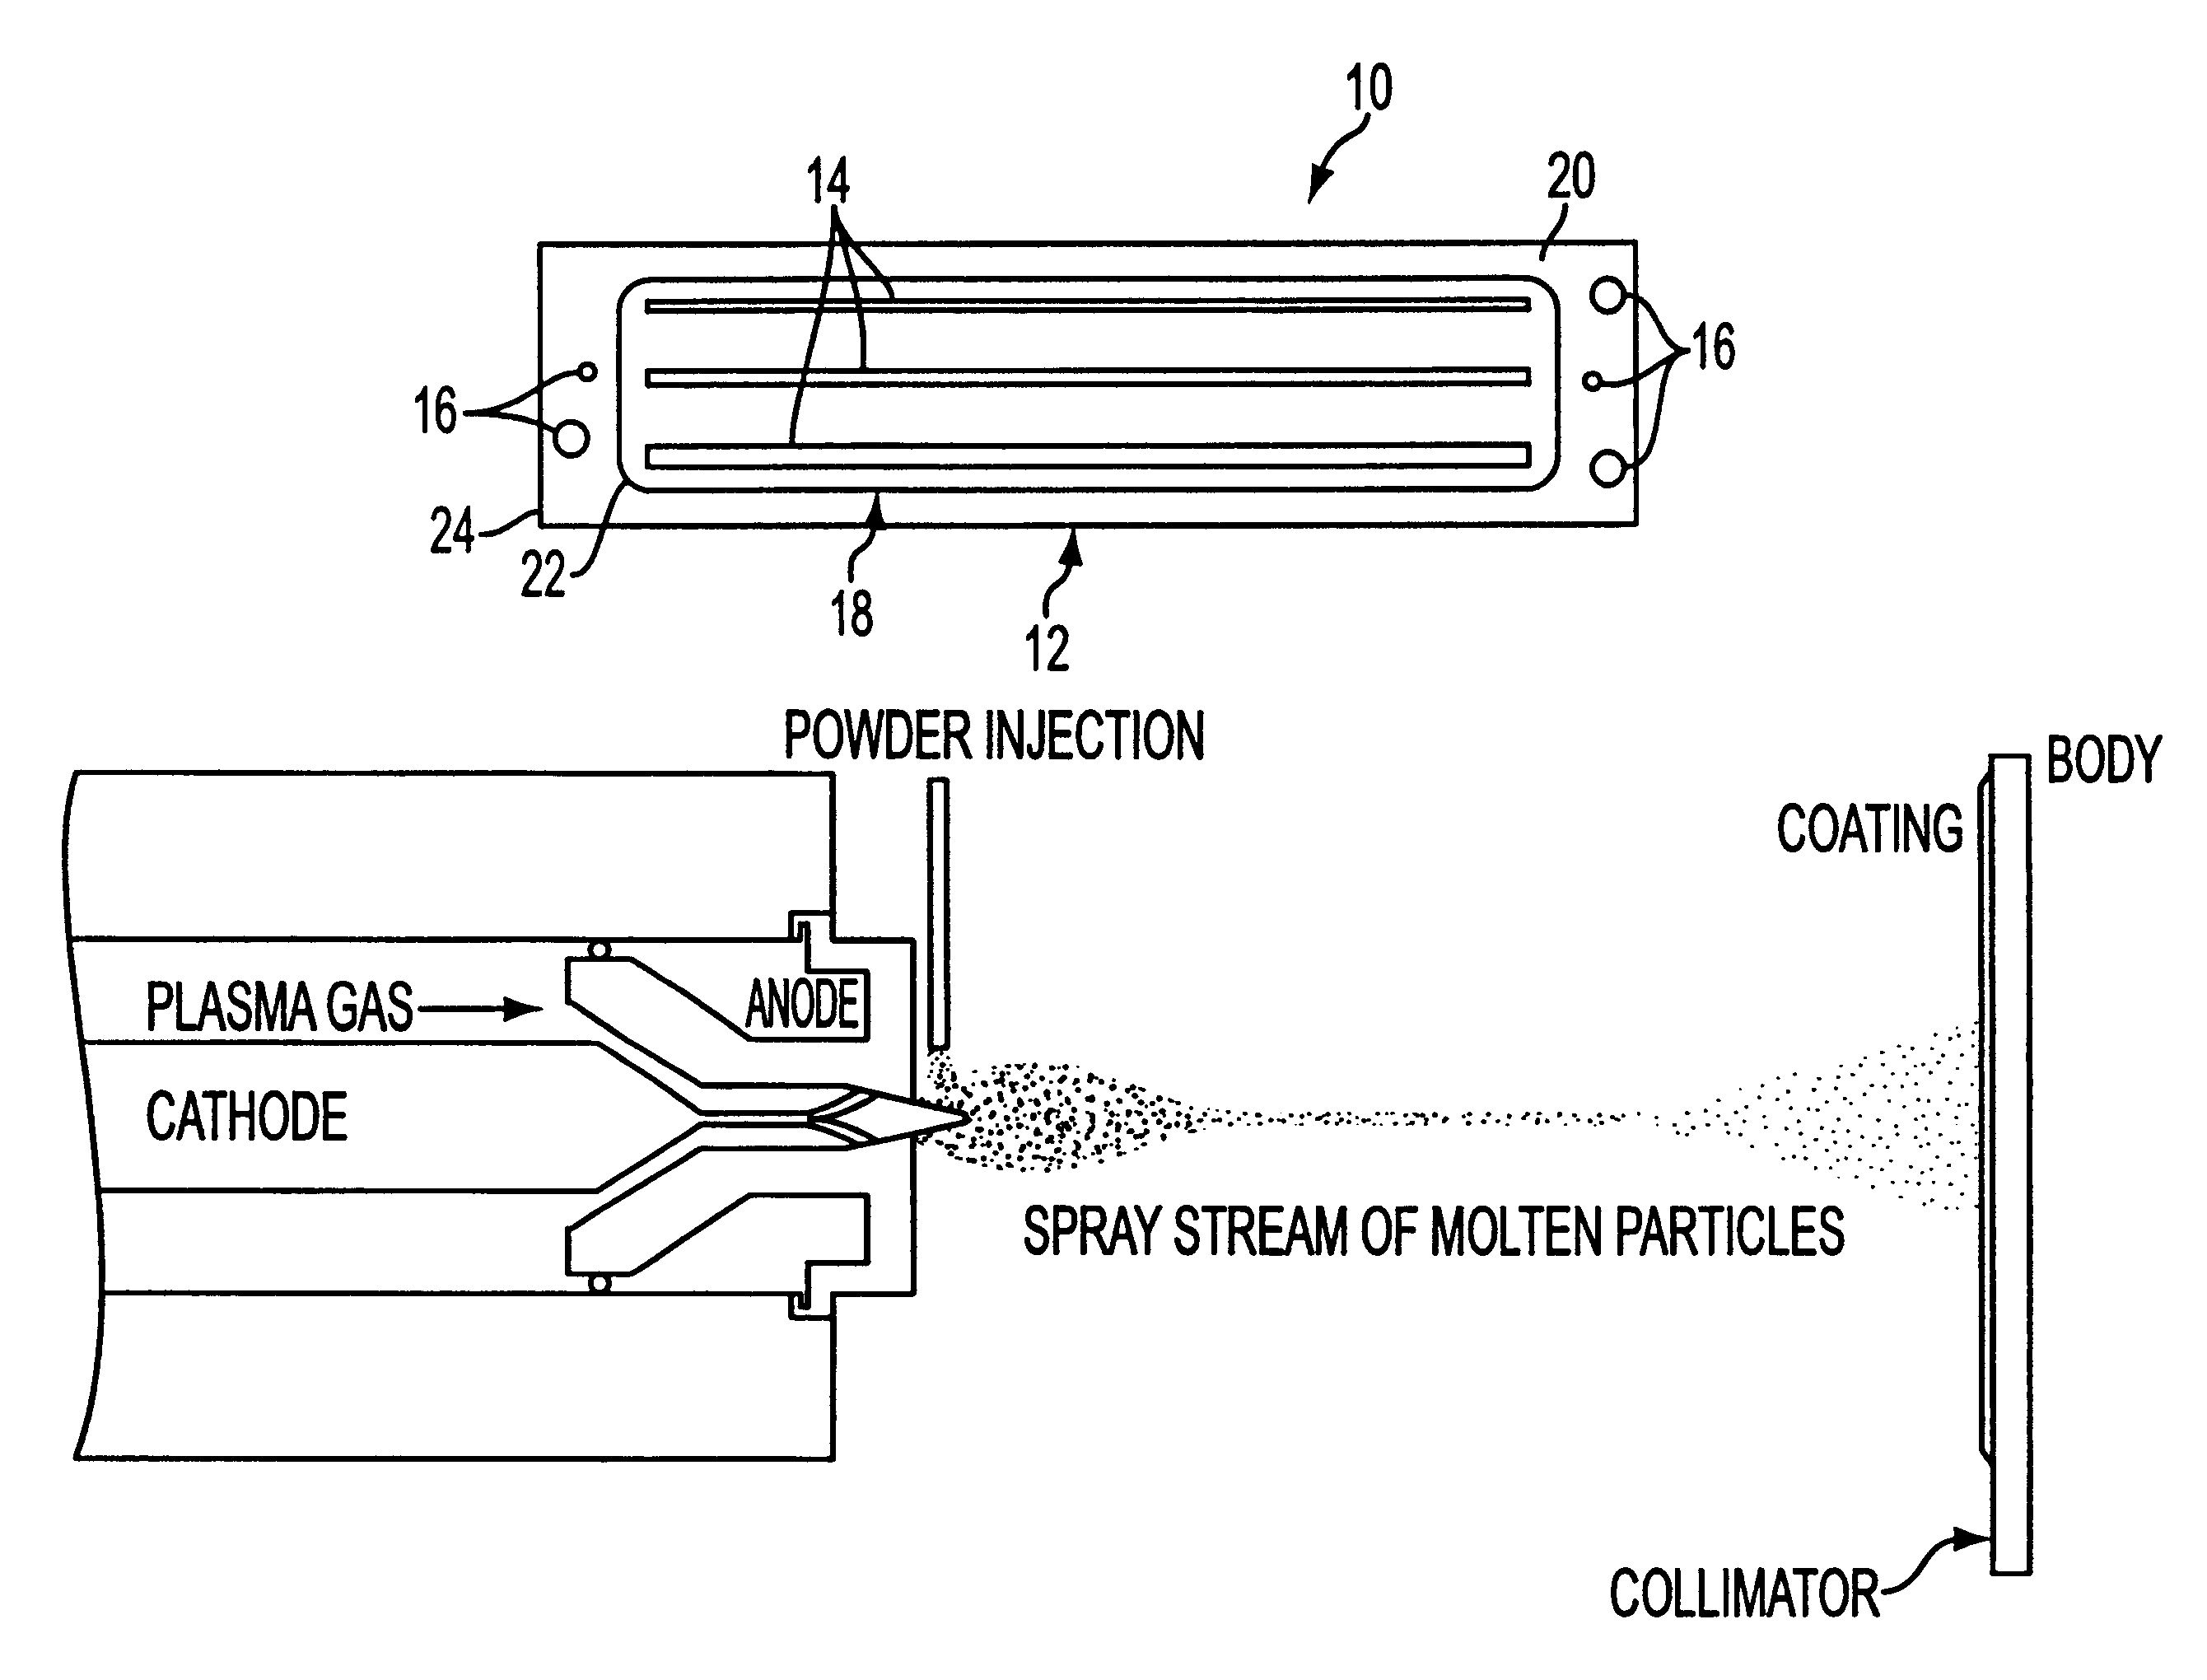 X-ray collimator and method of manufacturing an x-ray collimator